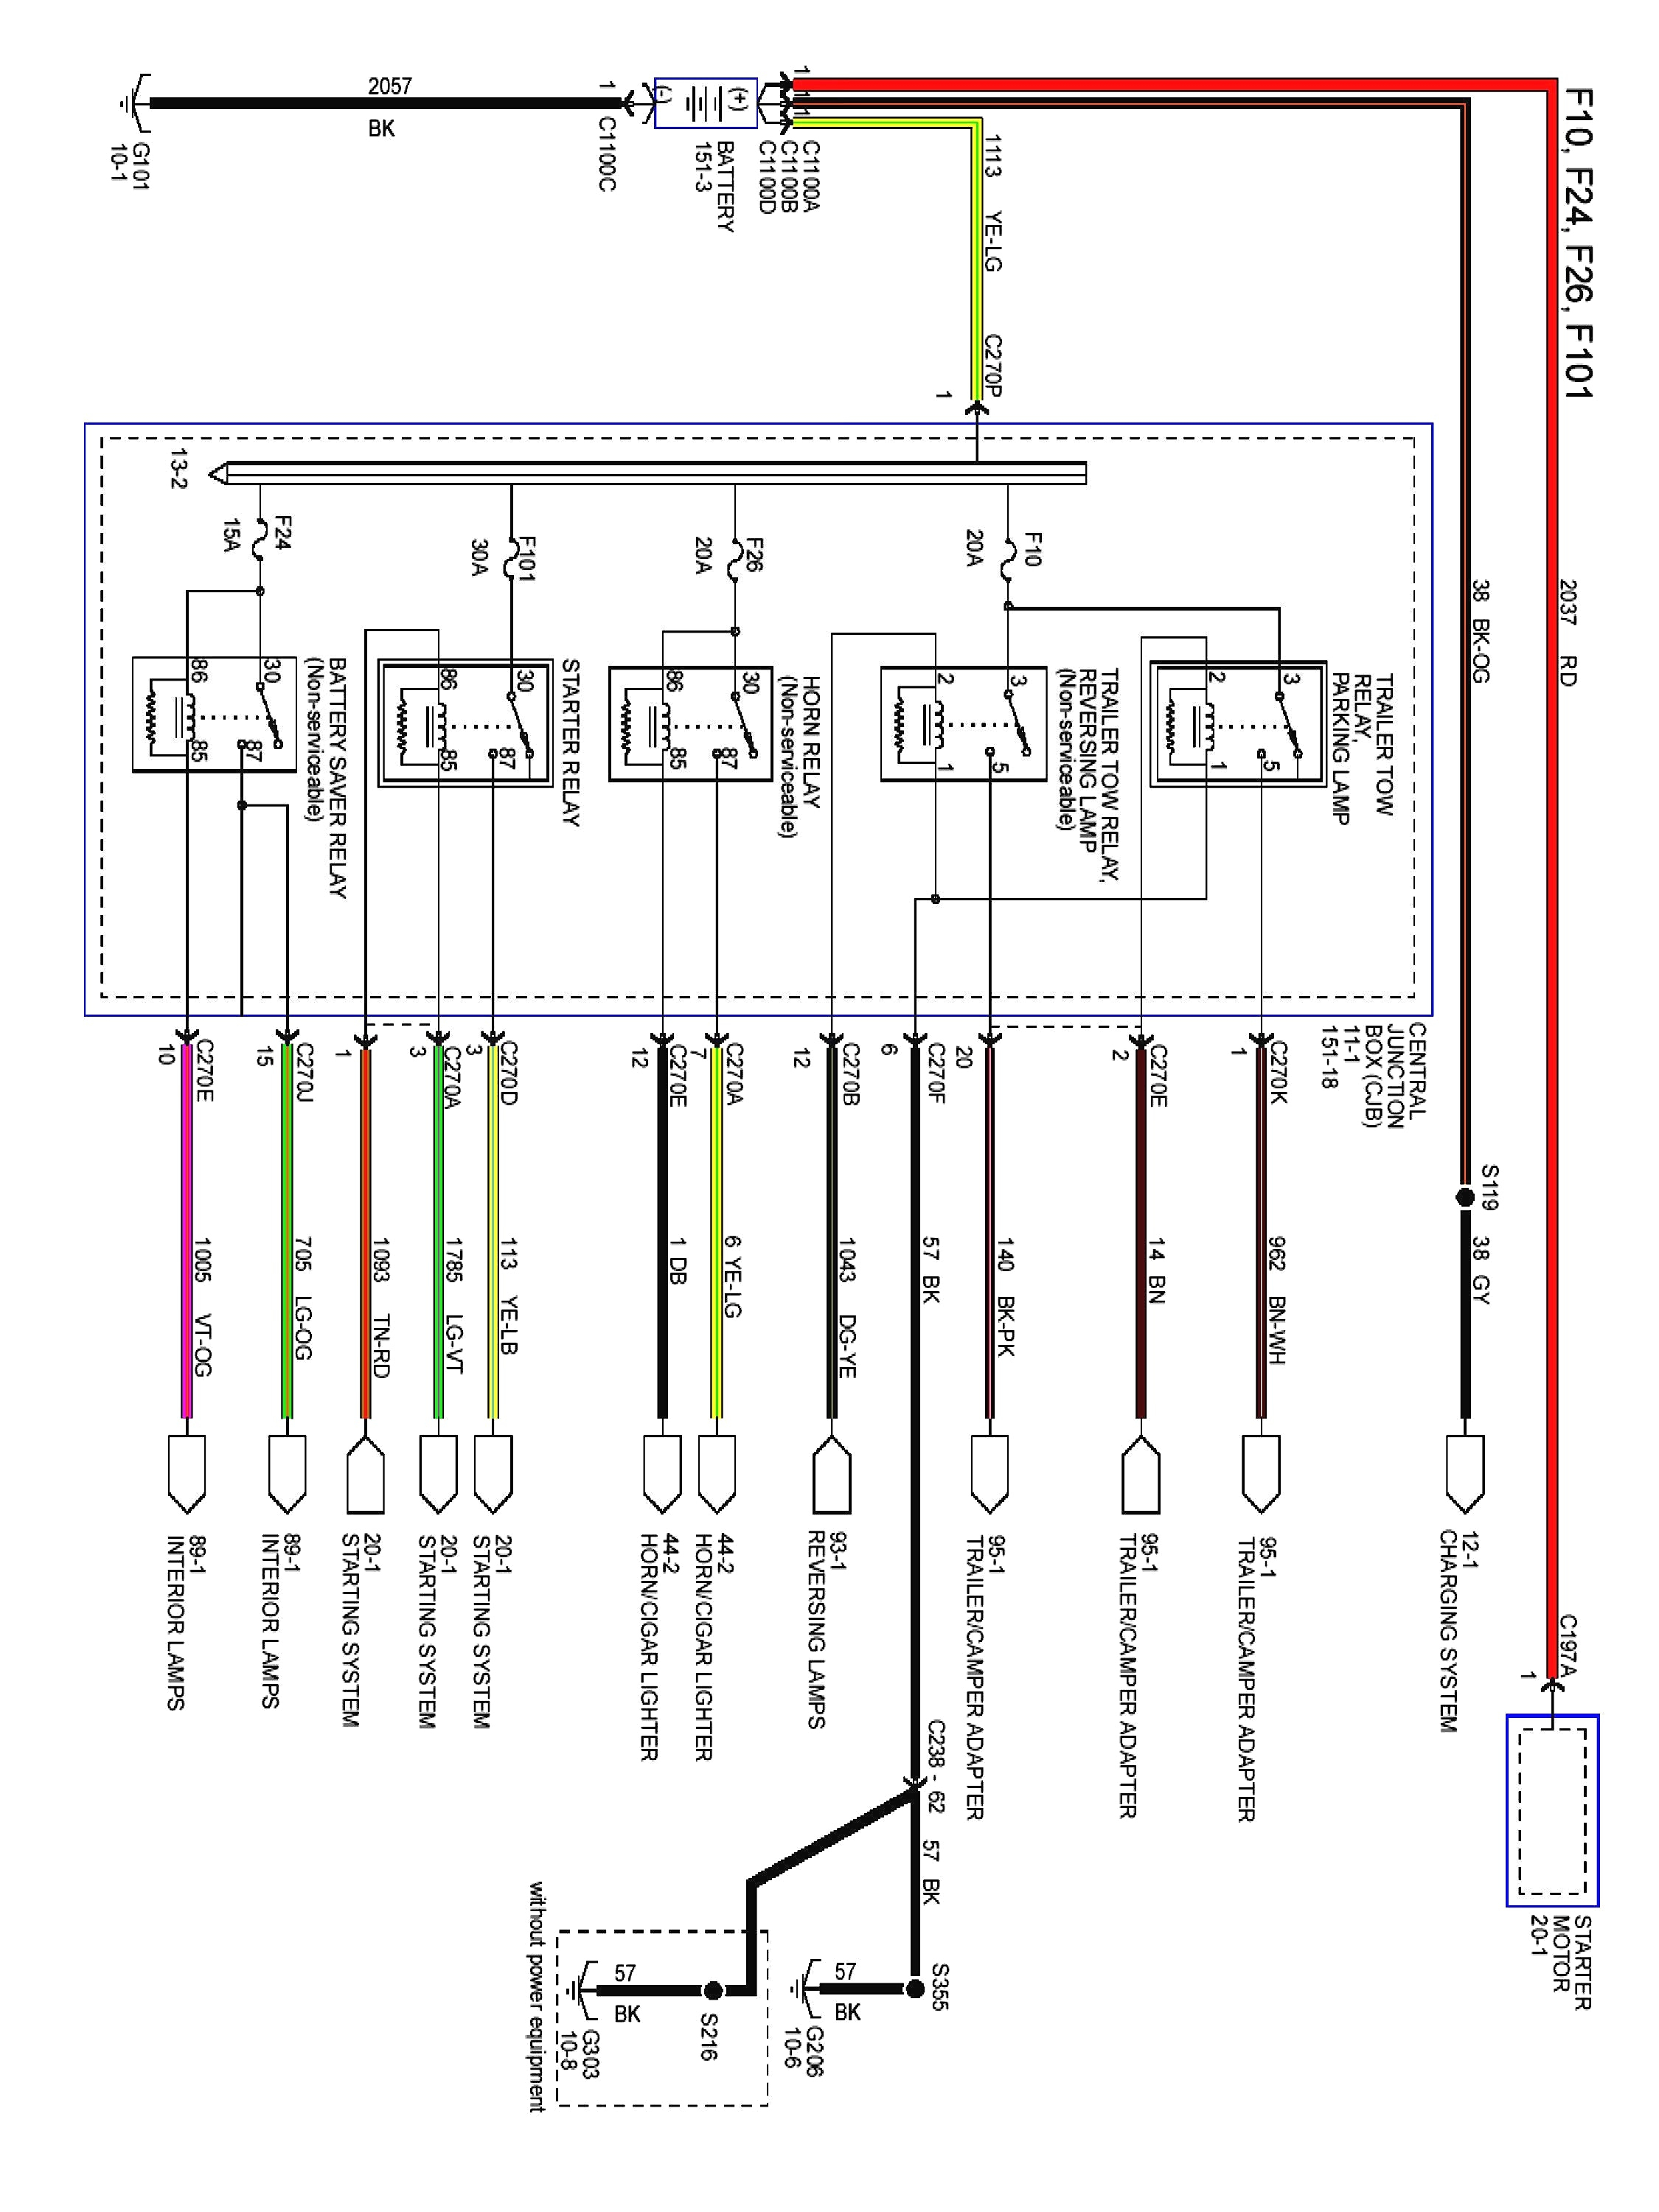 Wiring Diagram Ford F150 Headlights Free Download - Wiring Diagram - Ford Trailer Wiring Diagram